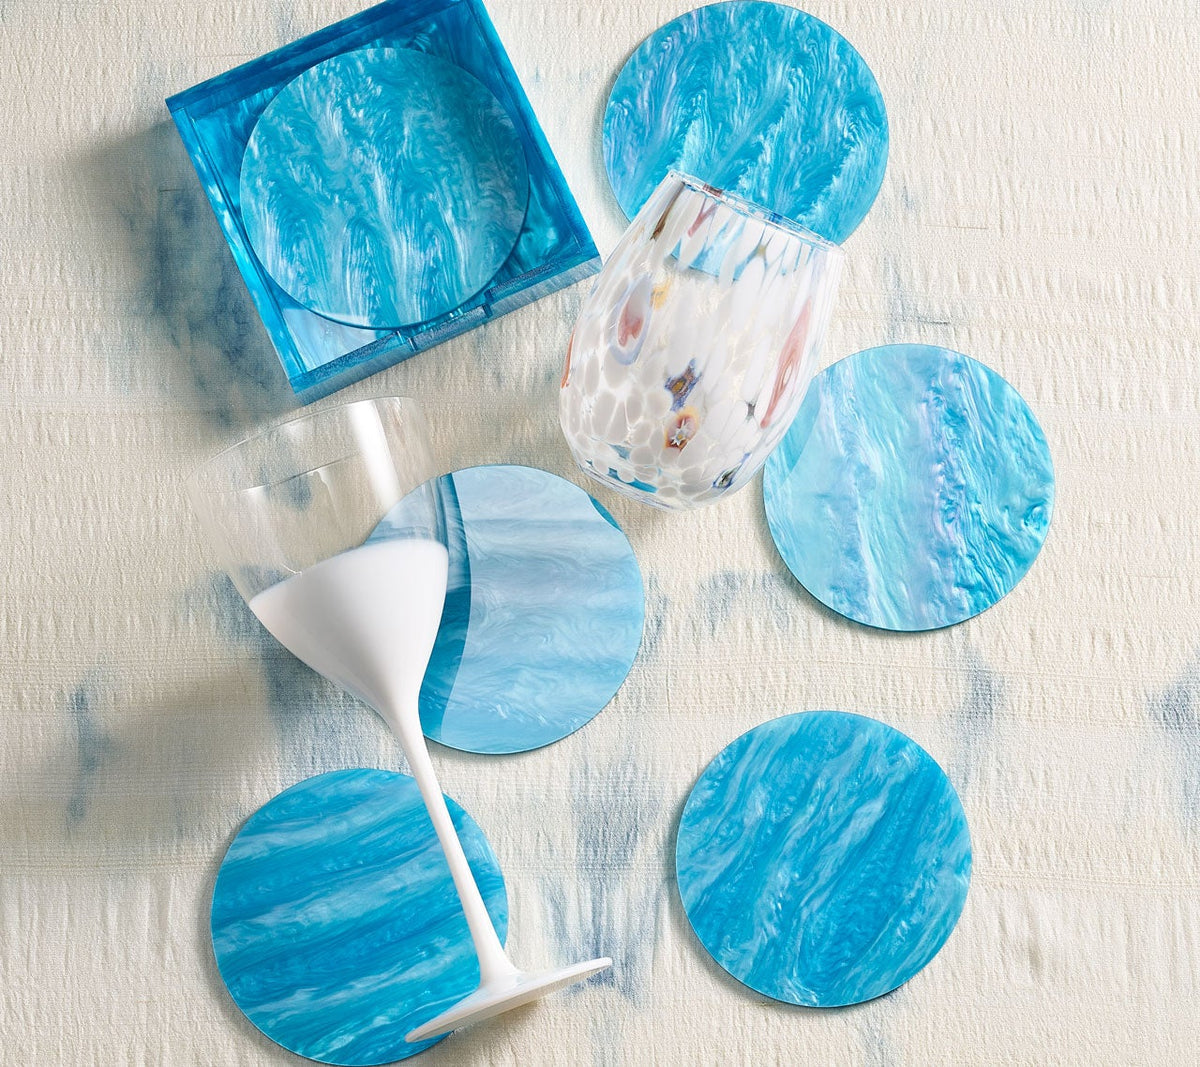 Mirage Drink Coasters in Aqua, Set of 6 in a Caddy